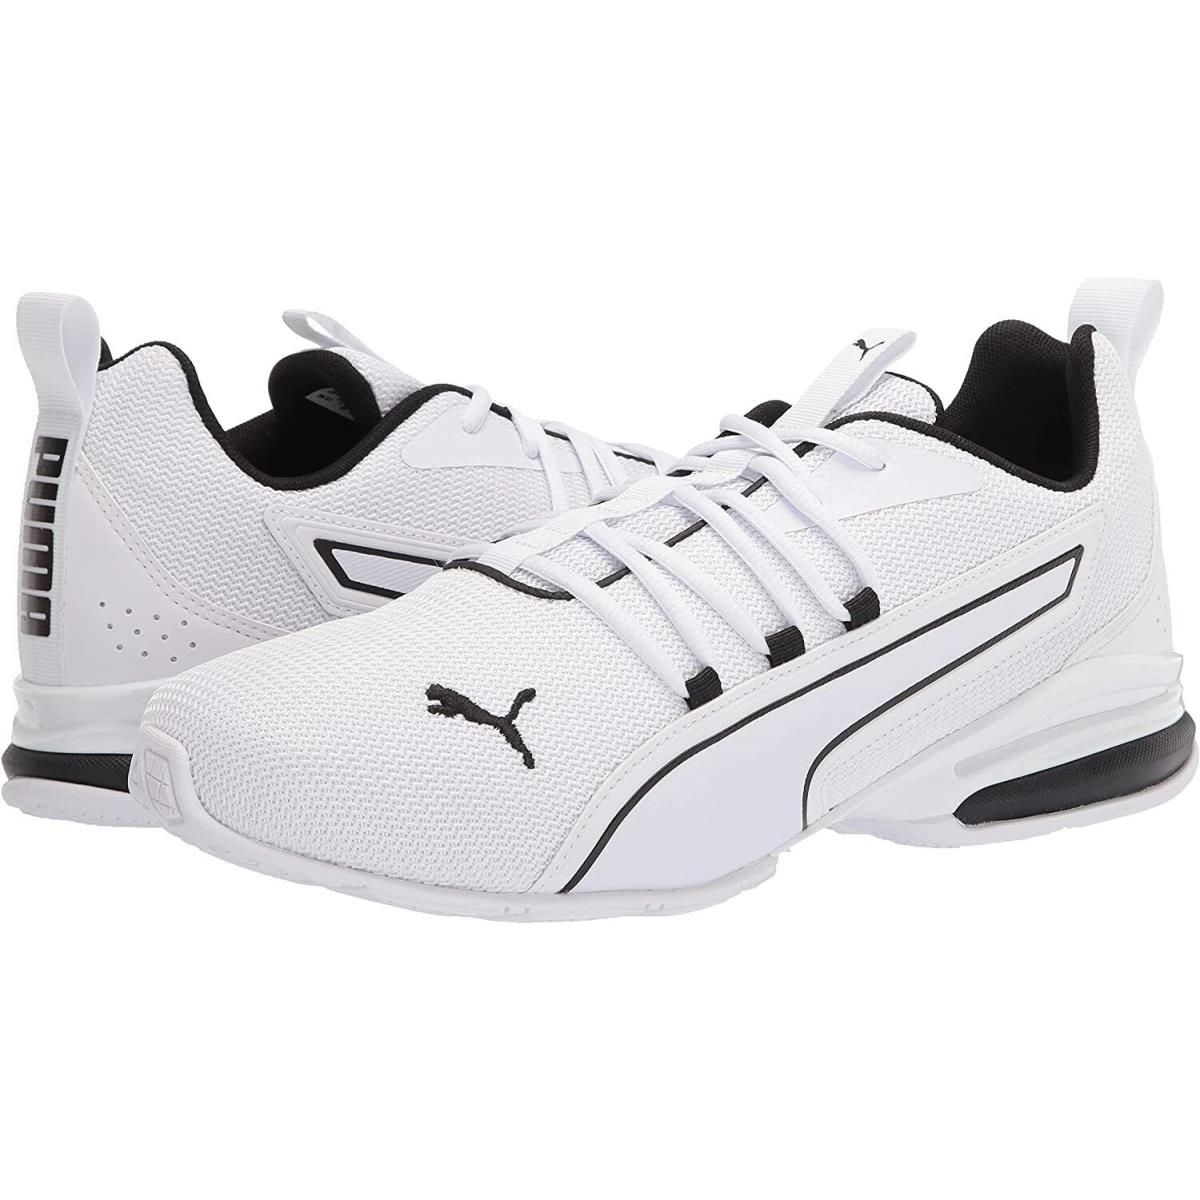 Men`s Shoes Puma Axelion Nxt Athletic Training Sneakers 19565603 White